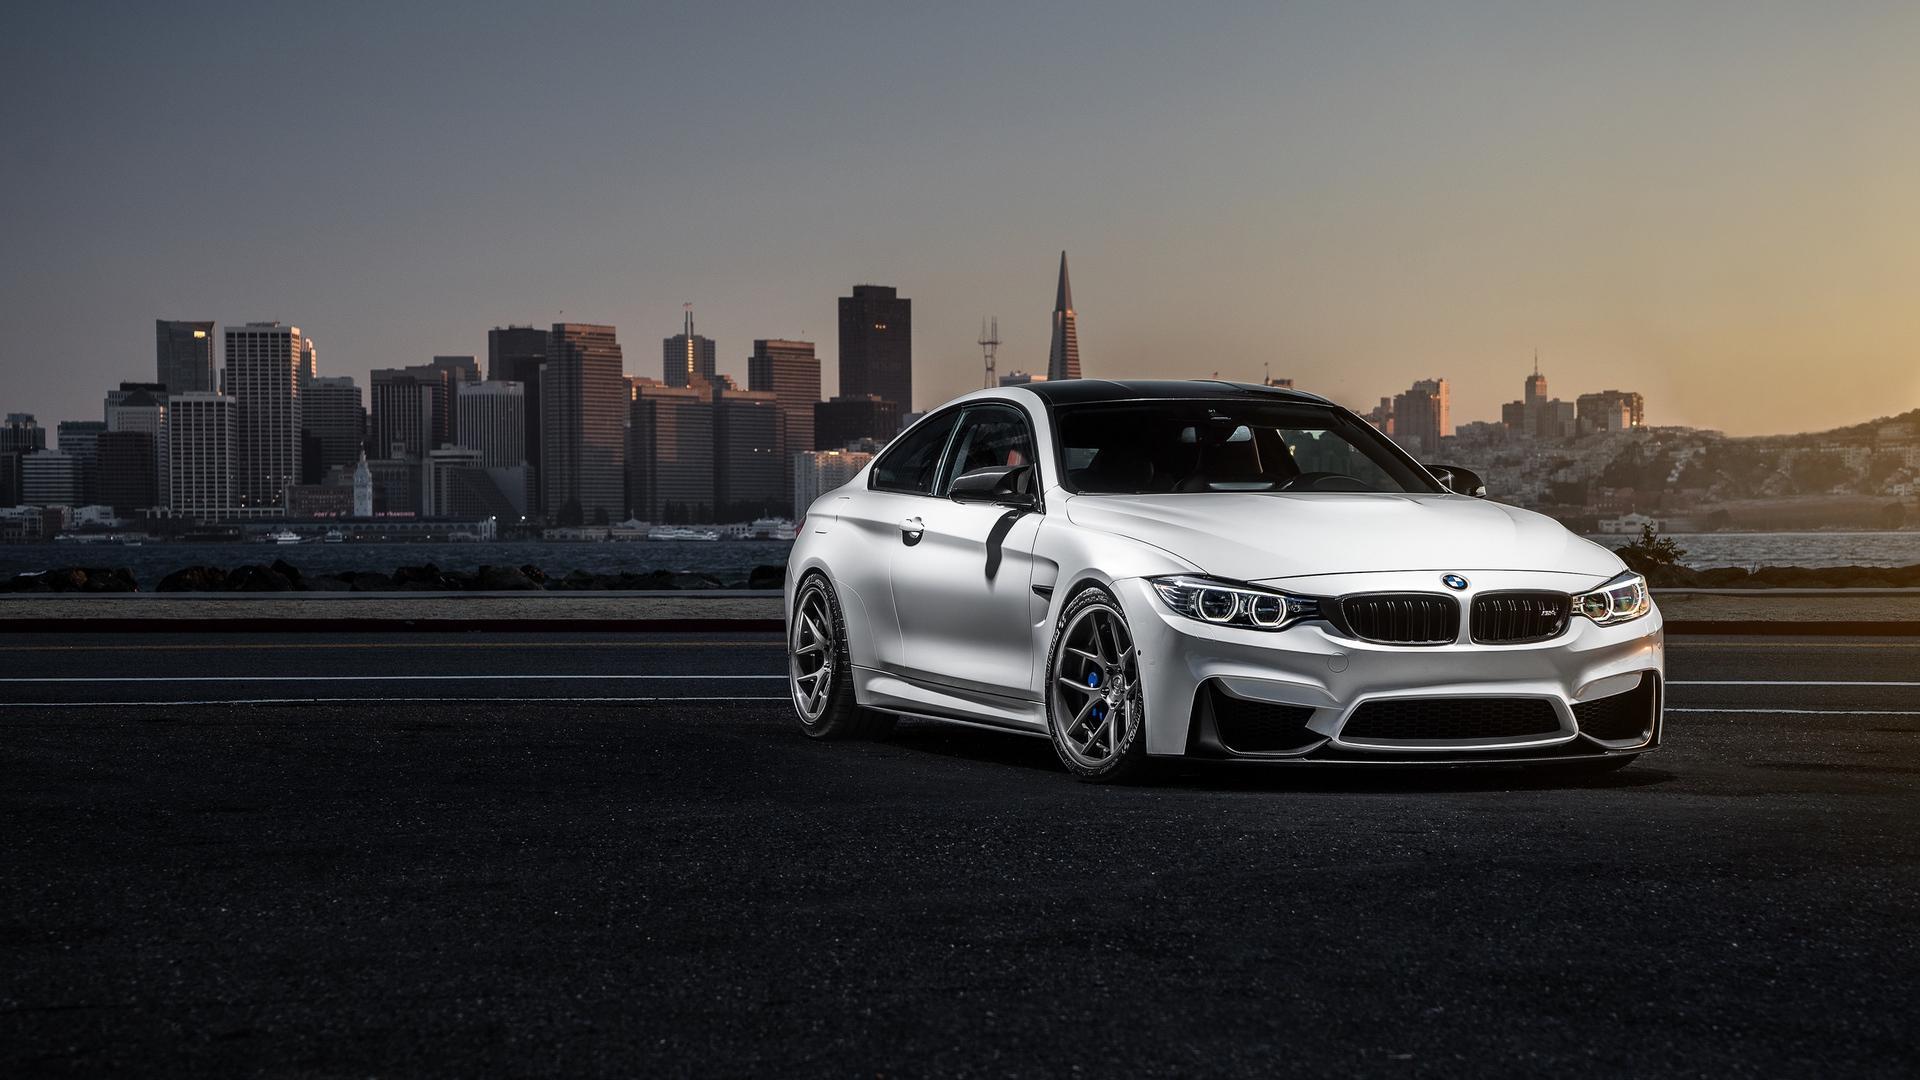 Bmw Wallpaper Hd 4k Pictures Images Backgrounds For Android Apk Download